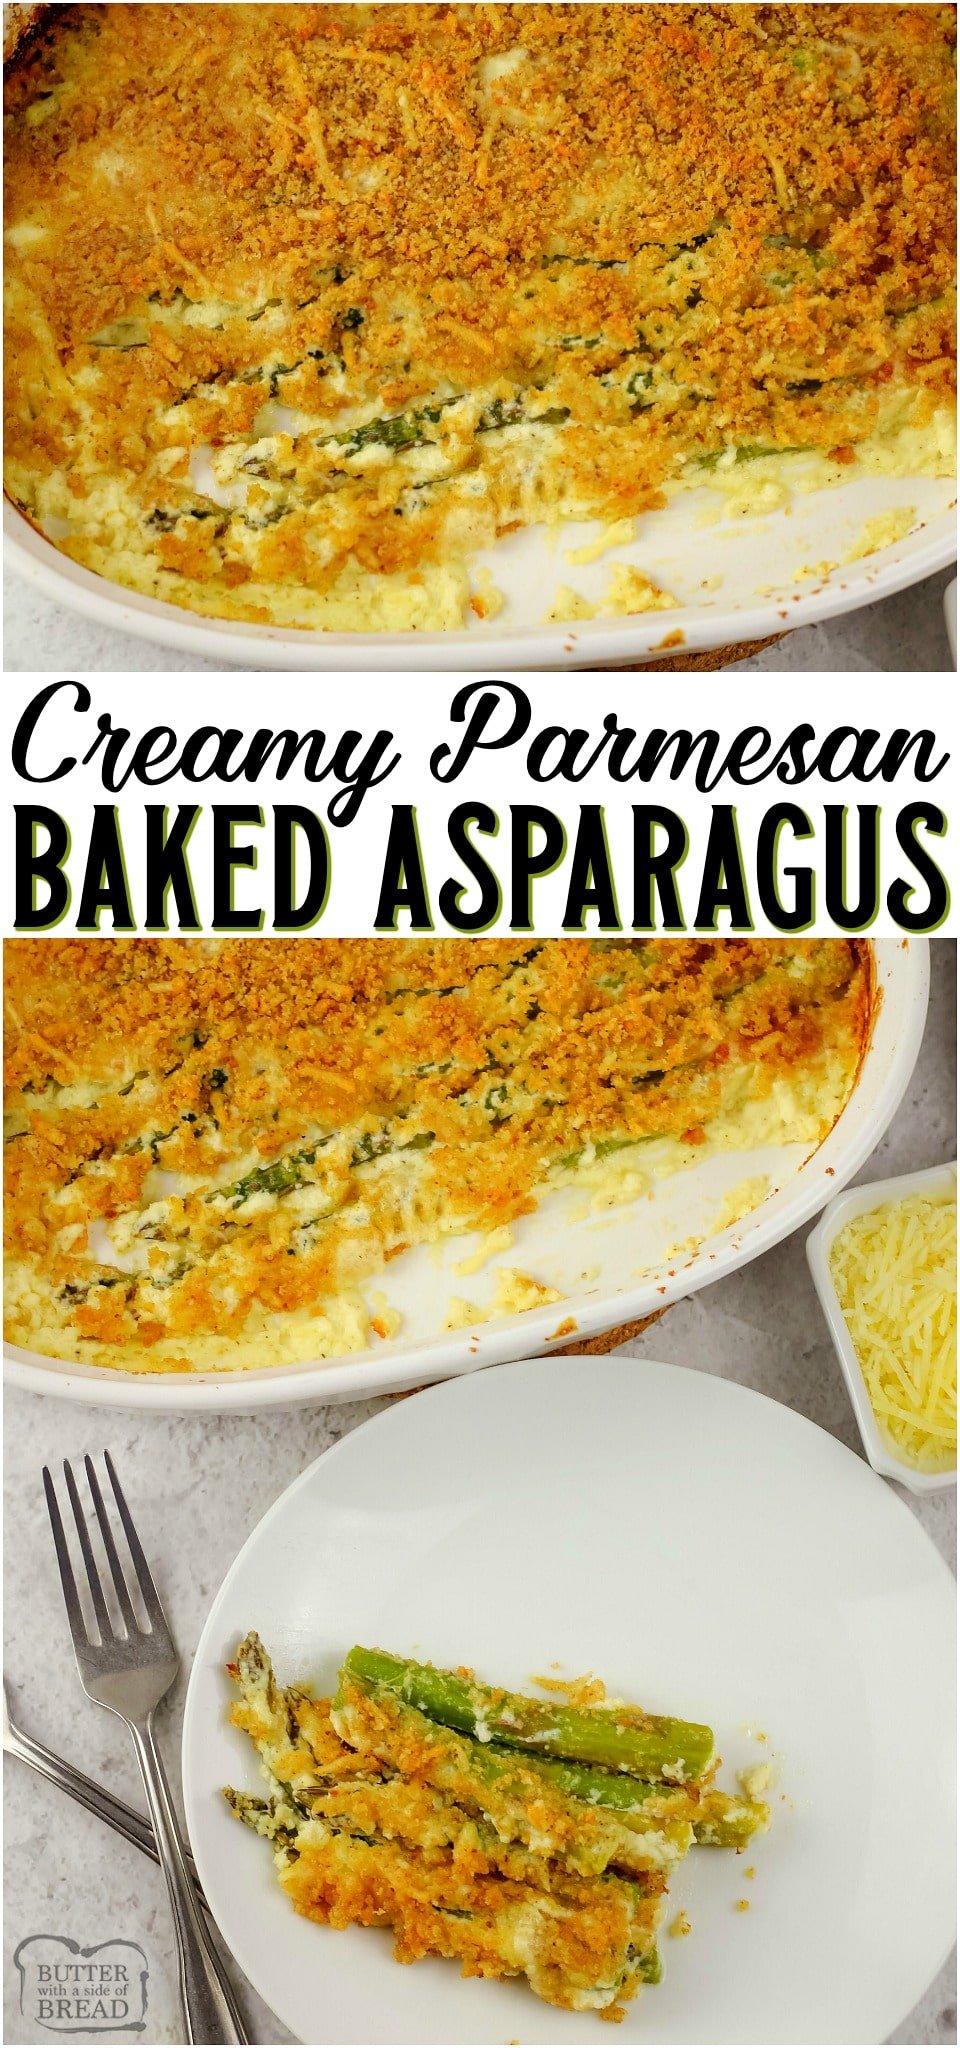 Creamy Baked Asparagus is a cheesy side dish made with fresh asparagus & parmesan cream sauce. Easy baked asparagus topped with bread crumbs and butter for a toasty crunch.